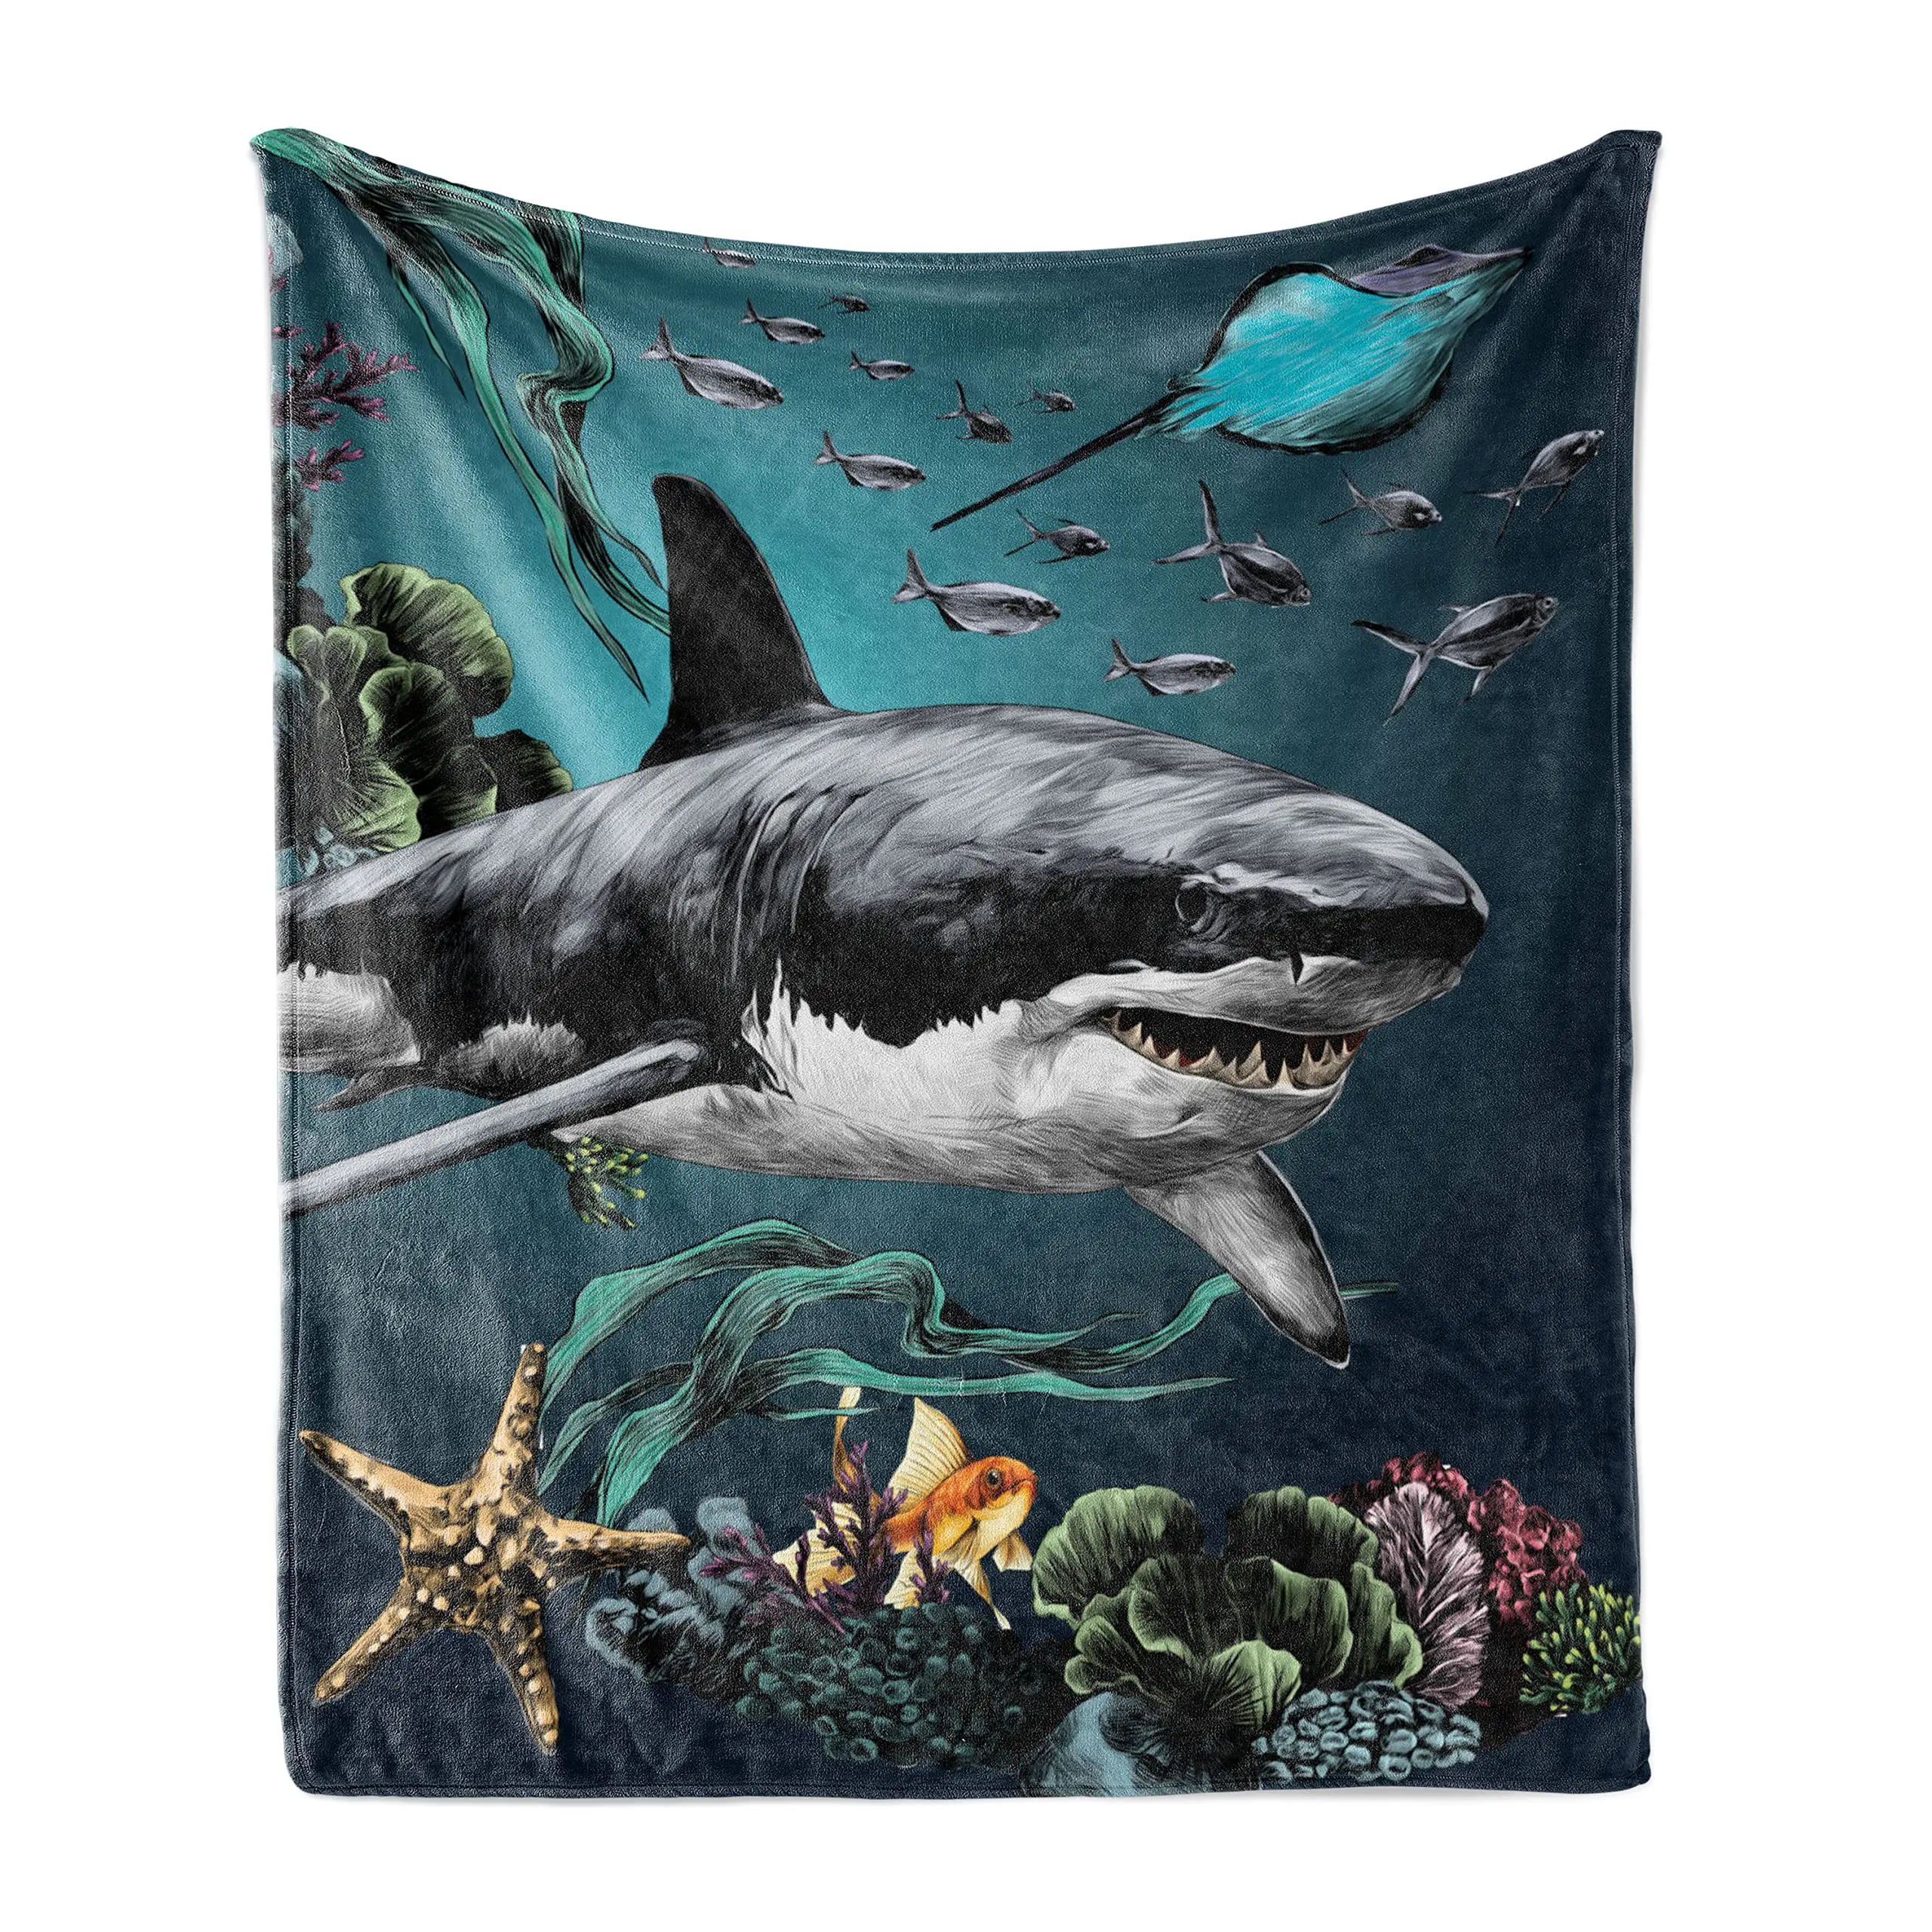 

Shark Throw Blanket, Underwater Marine Life Scene with Fishes and Sea Plants Corals Starfish Flannel Soft Blanket for Adult Gift